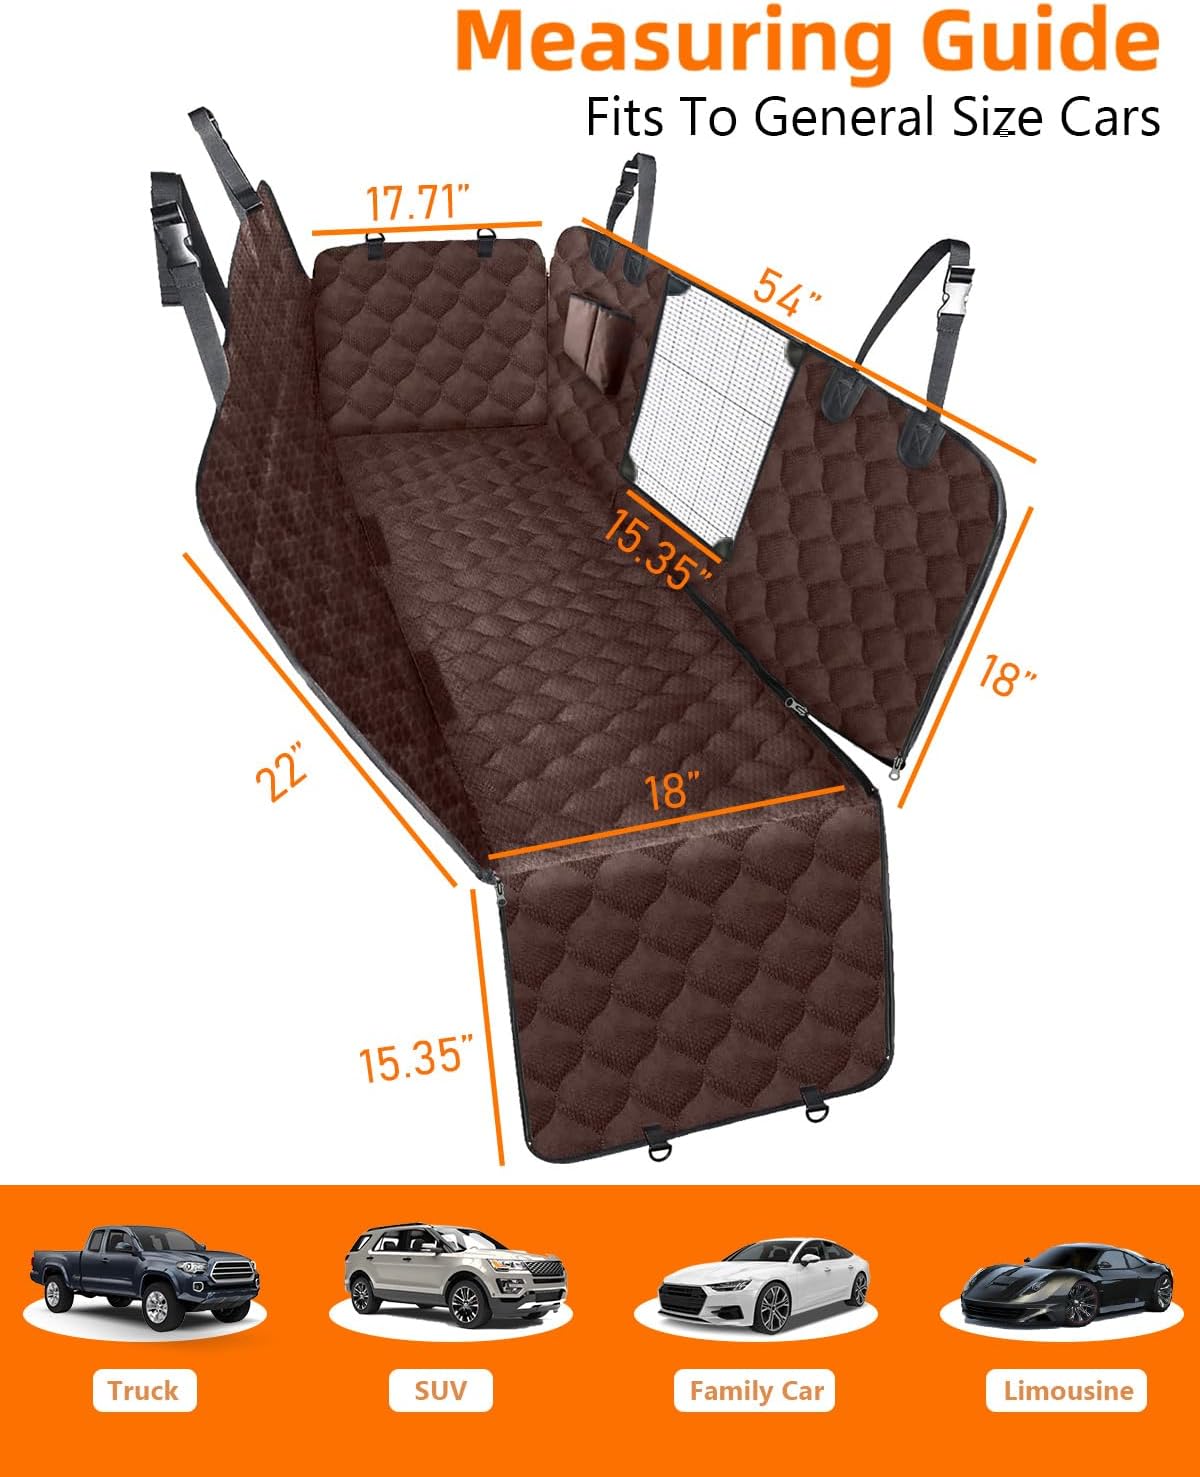 PETICON Dog Car Seat Cover for Back Seat, Waterproof Dog Seat Cover for Cars with Mesh Window, Scratchproof Back Seat Cover for Dogs, Nonslip Dog Hammock for Cars, Trucks, SUVs, Jeeps, Brown